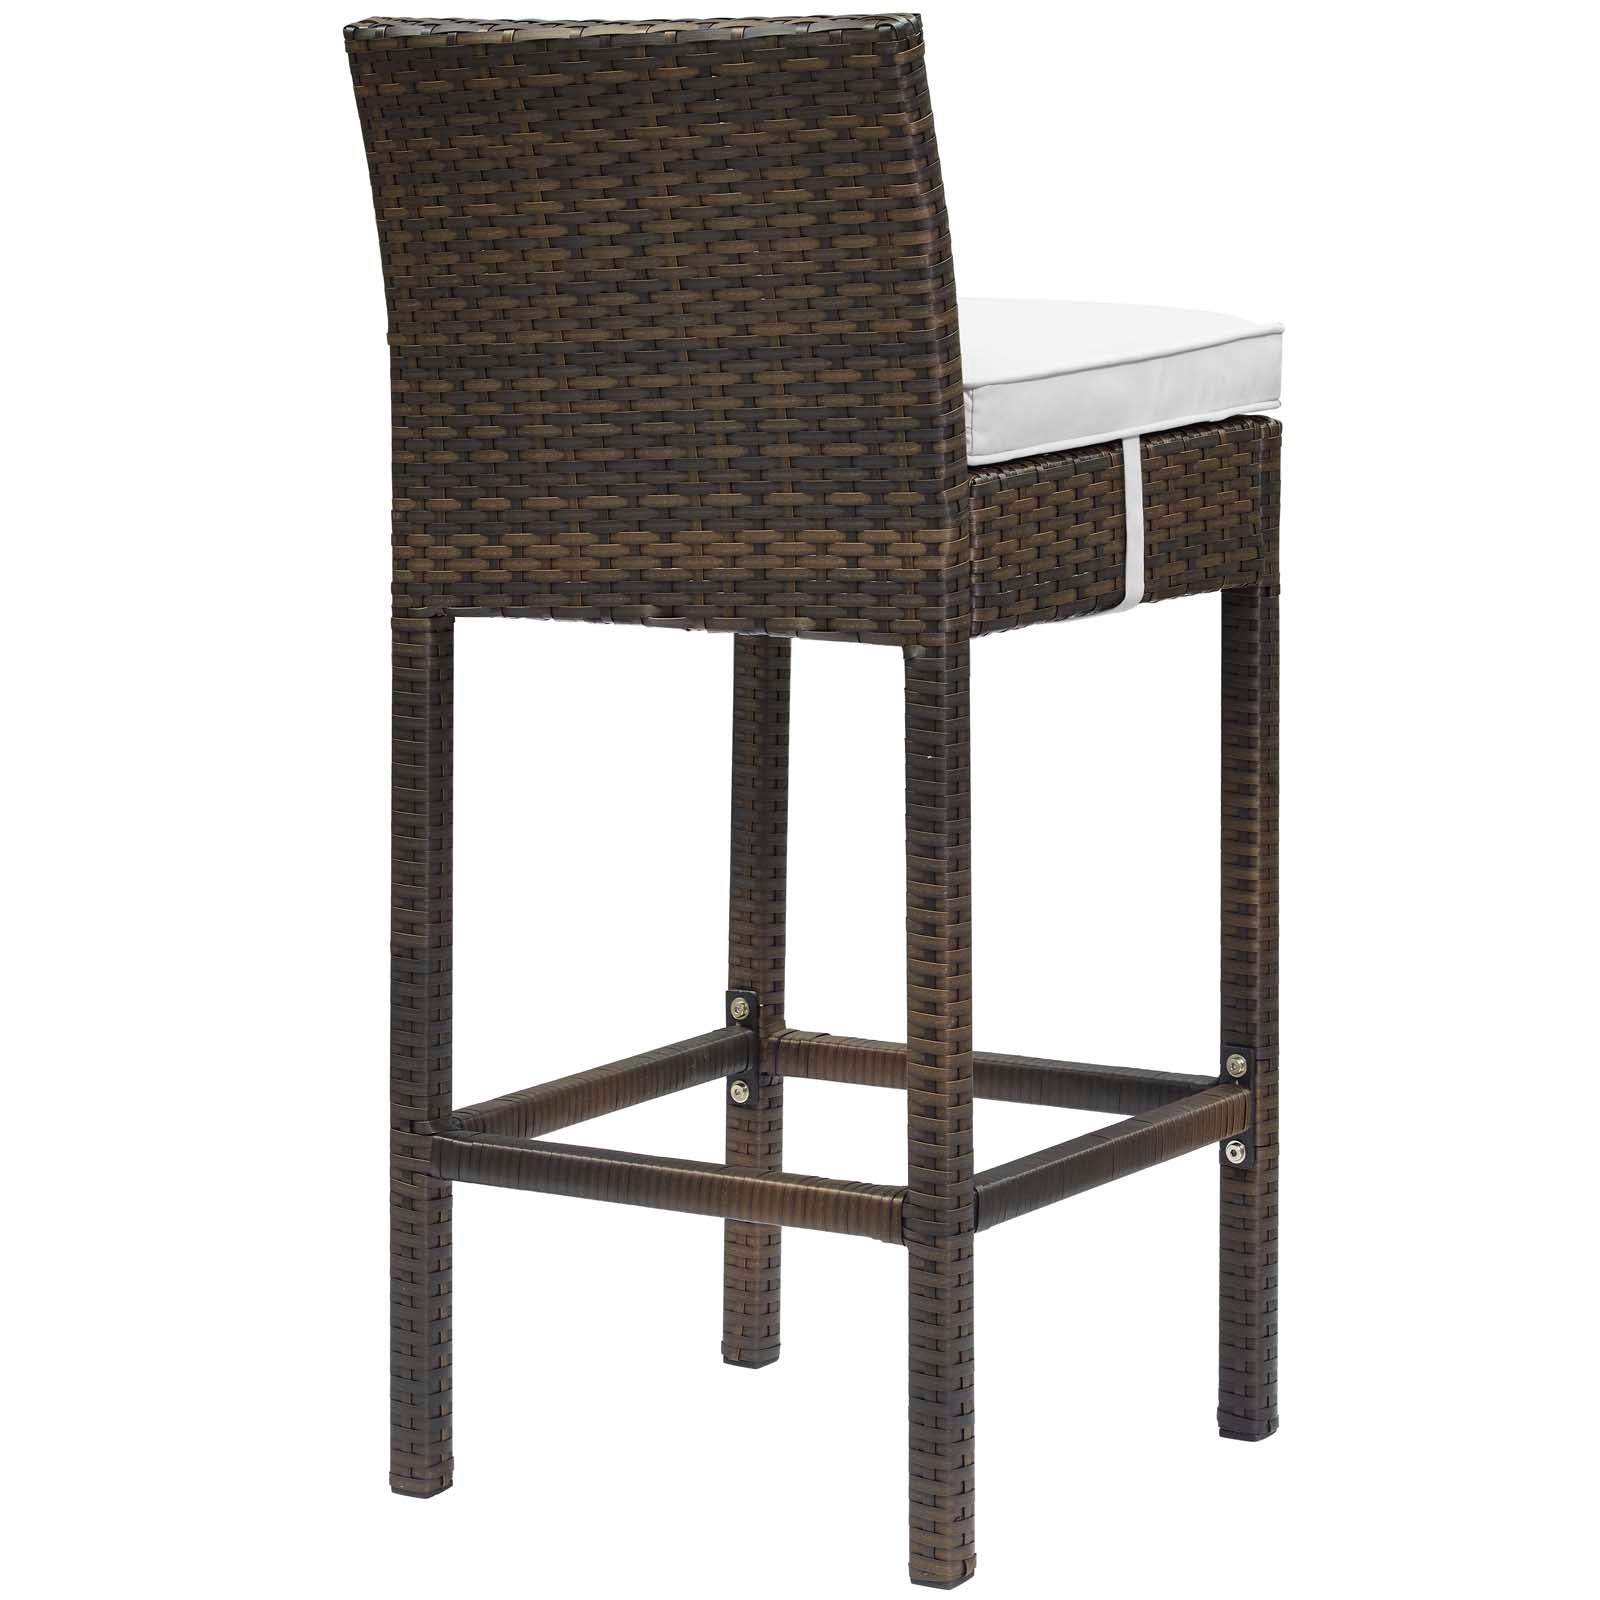 Modway Outdoor Barstools - Conduit Outdoor Patio Wicker Rattan Bar Stool Brown White